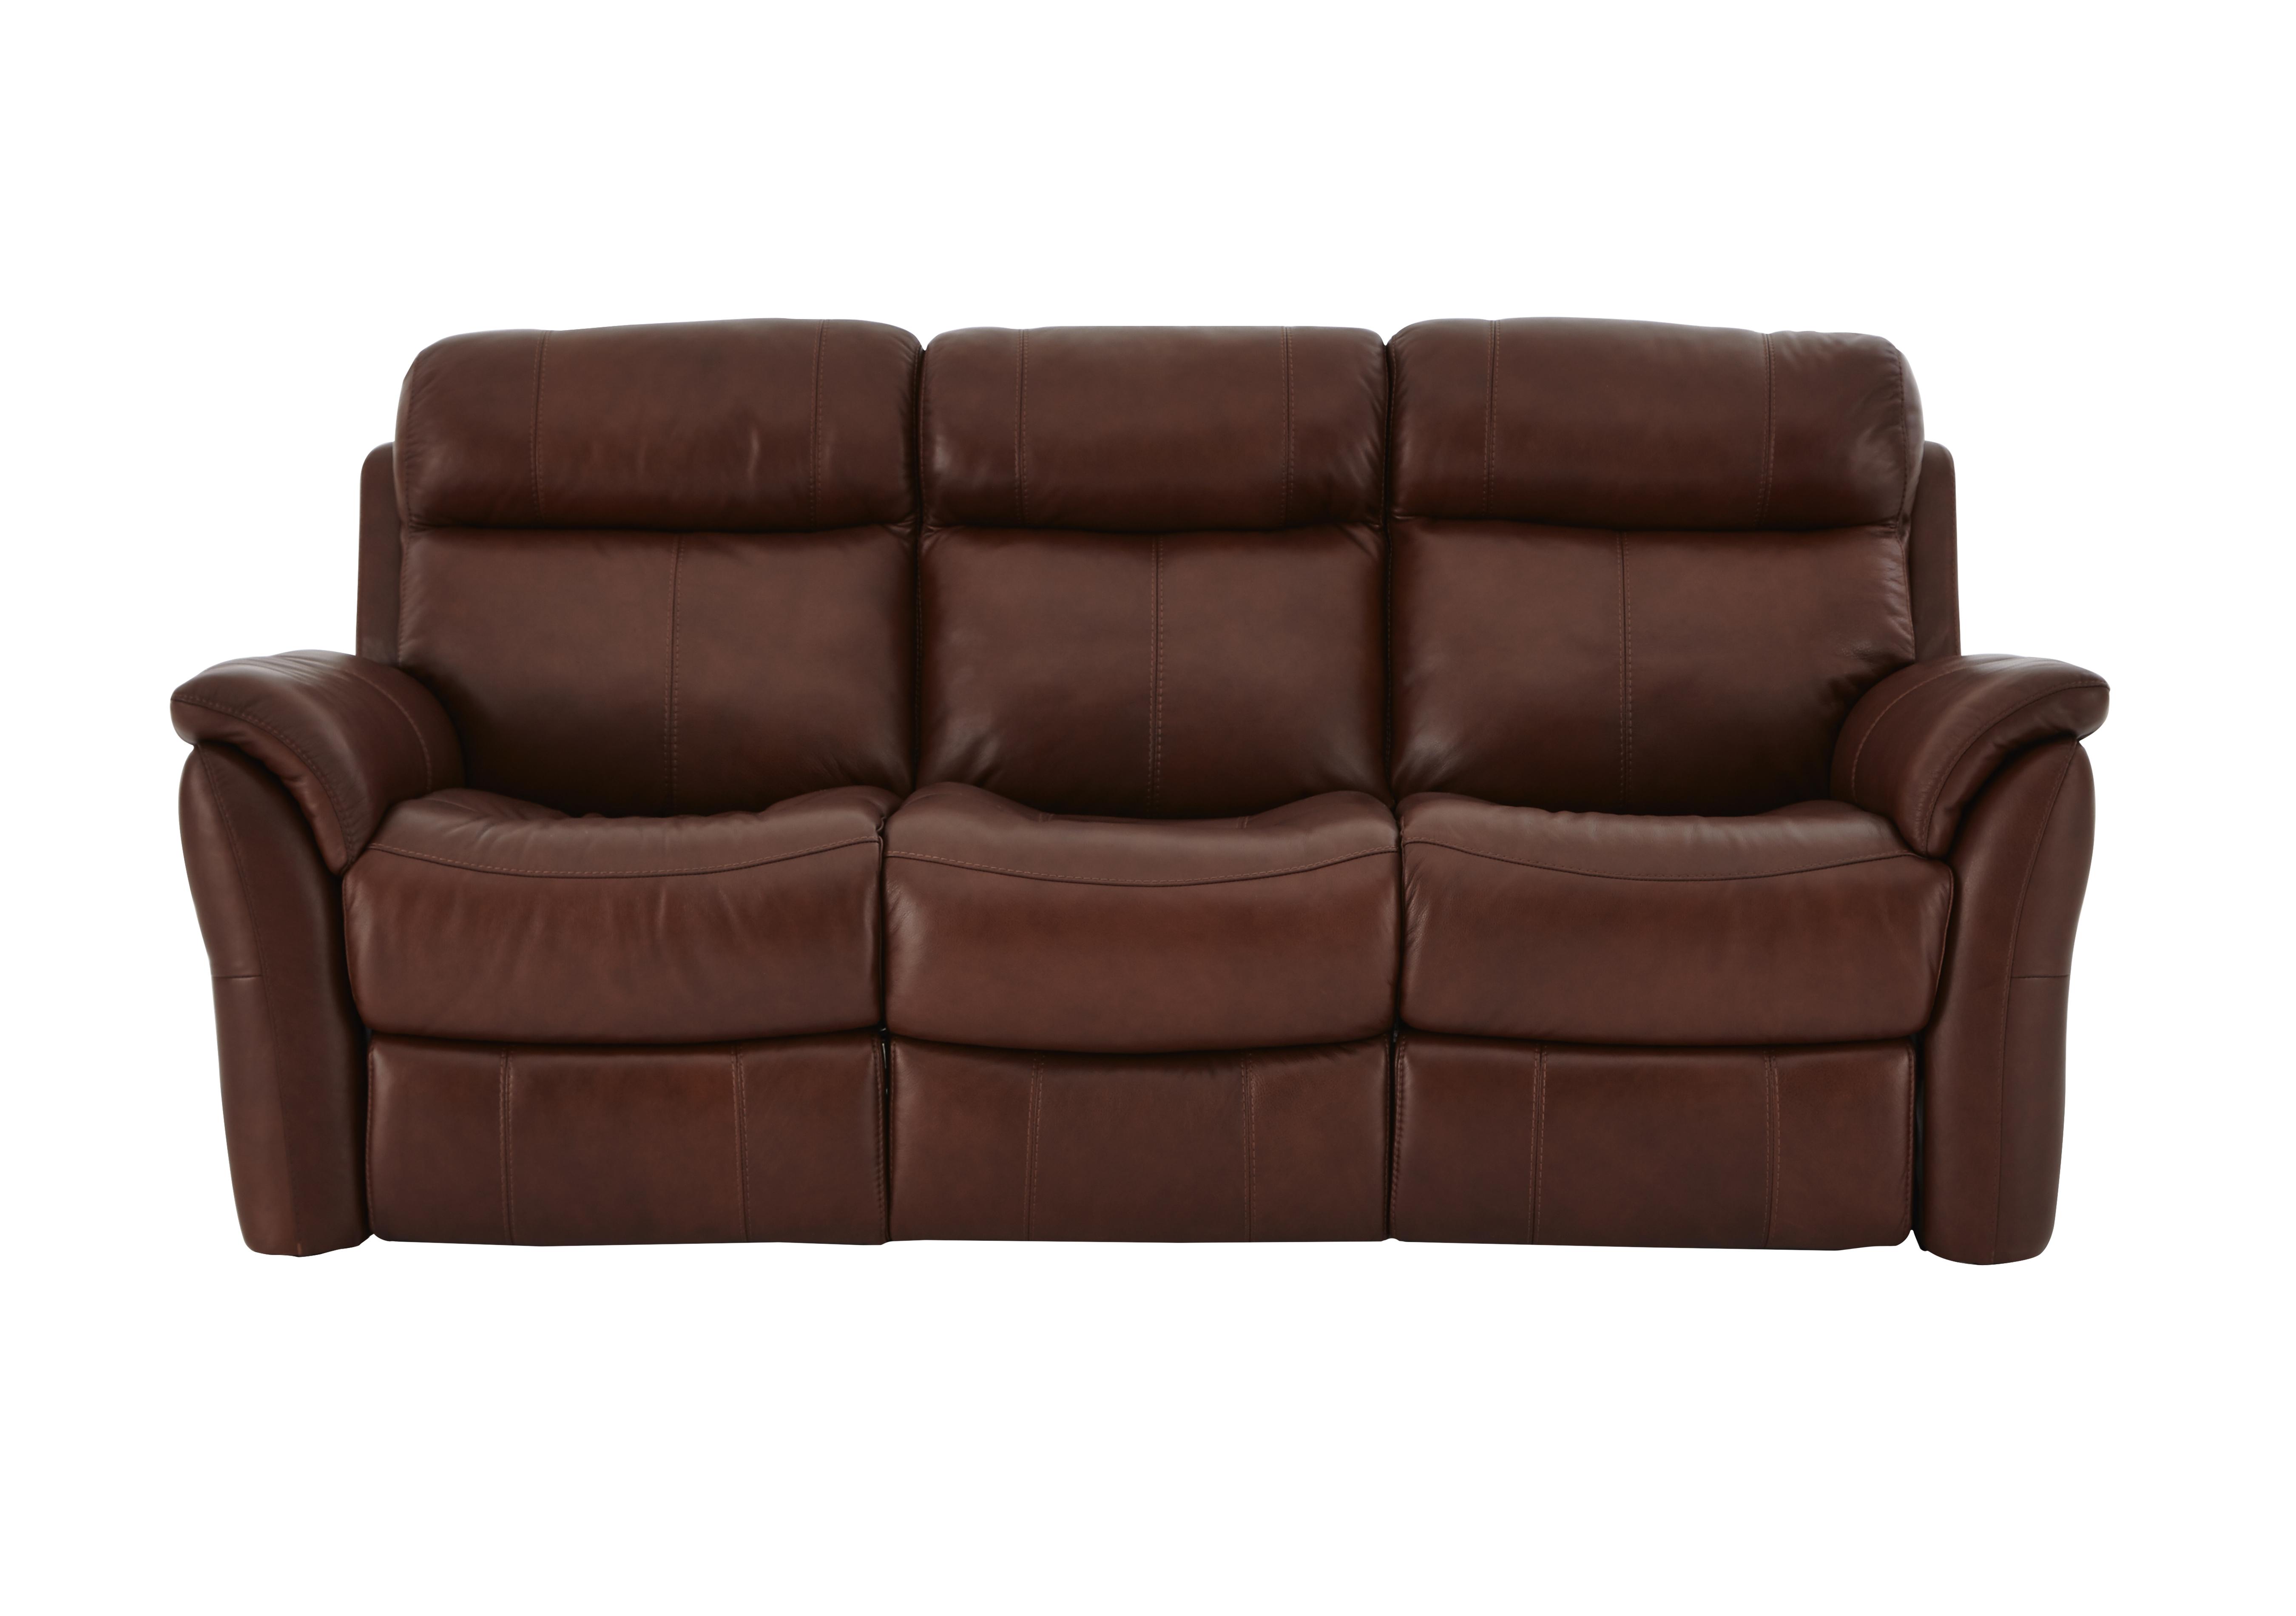 Relax Station Revive 3 Seater Leather Sofa in Sk-297e Cumin on Furniture Village